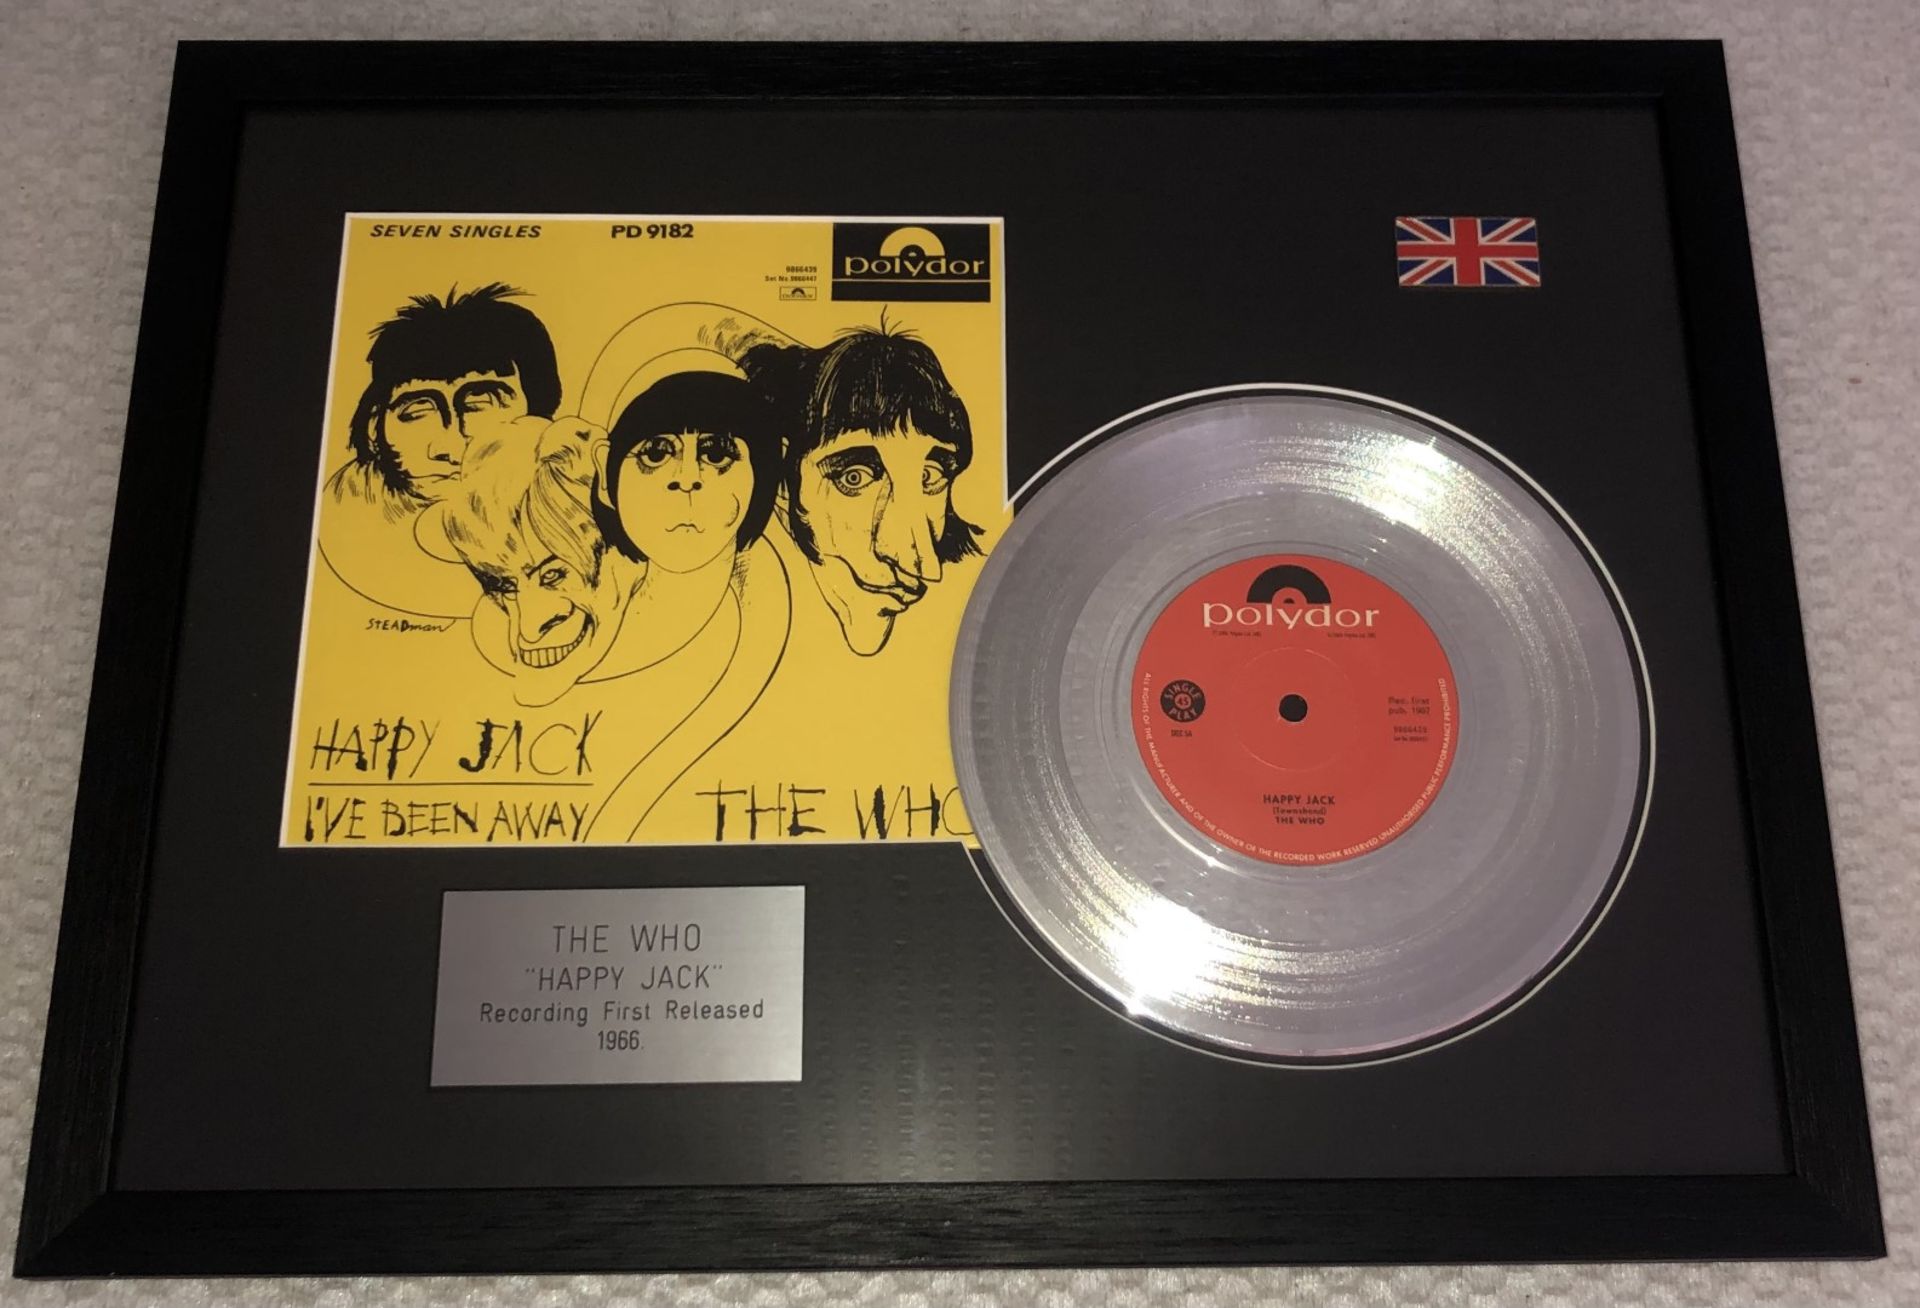 1 x Framed THE WHO Silver 7 Inch Vinyl Record - HAPPY JACK